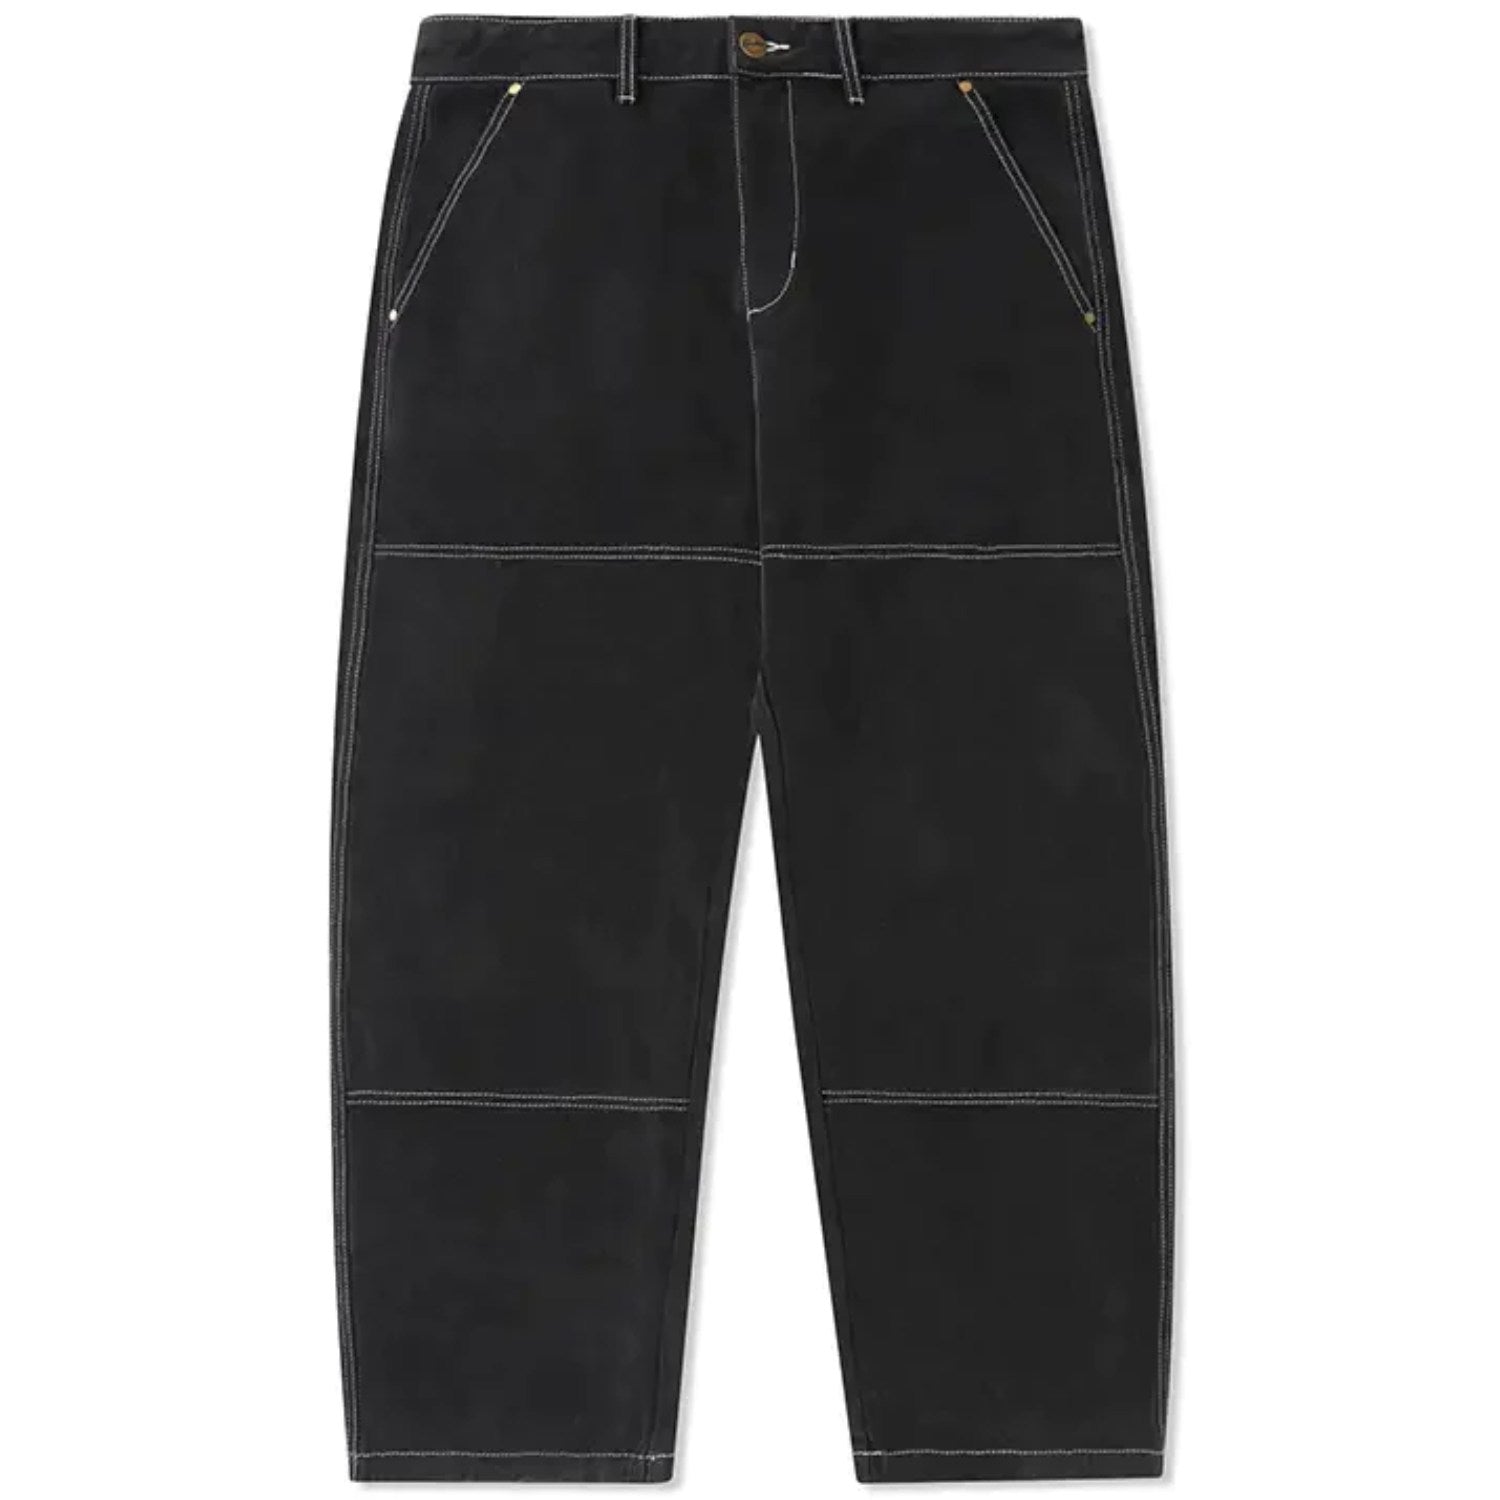 Butter Goods - Work Double Knee Pants - Washed Black